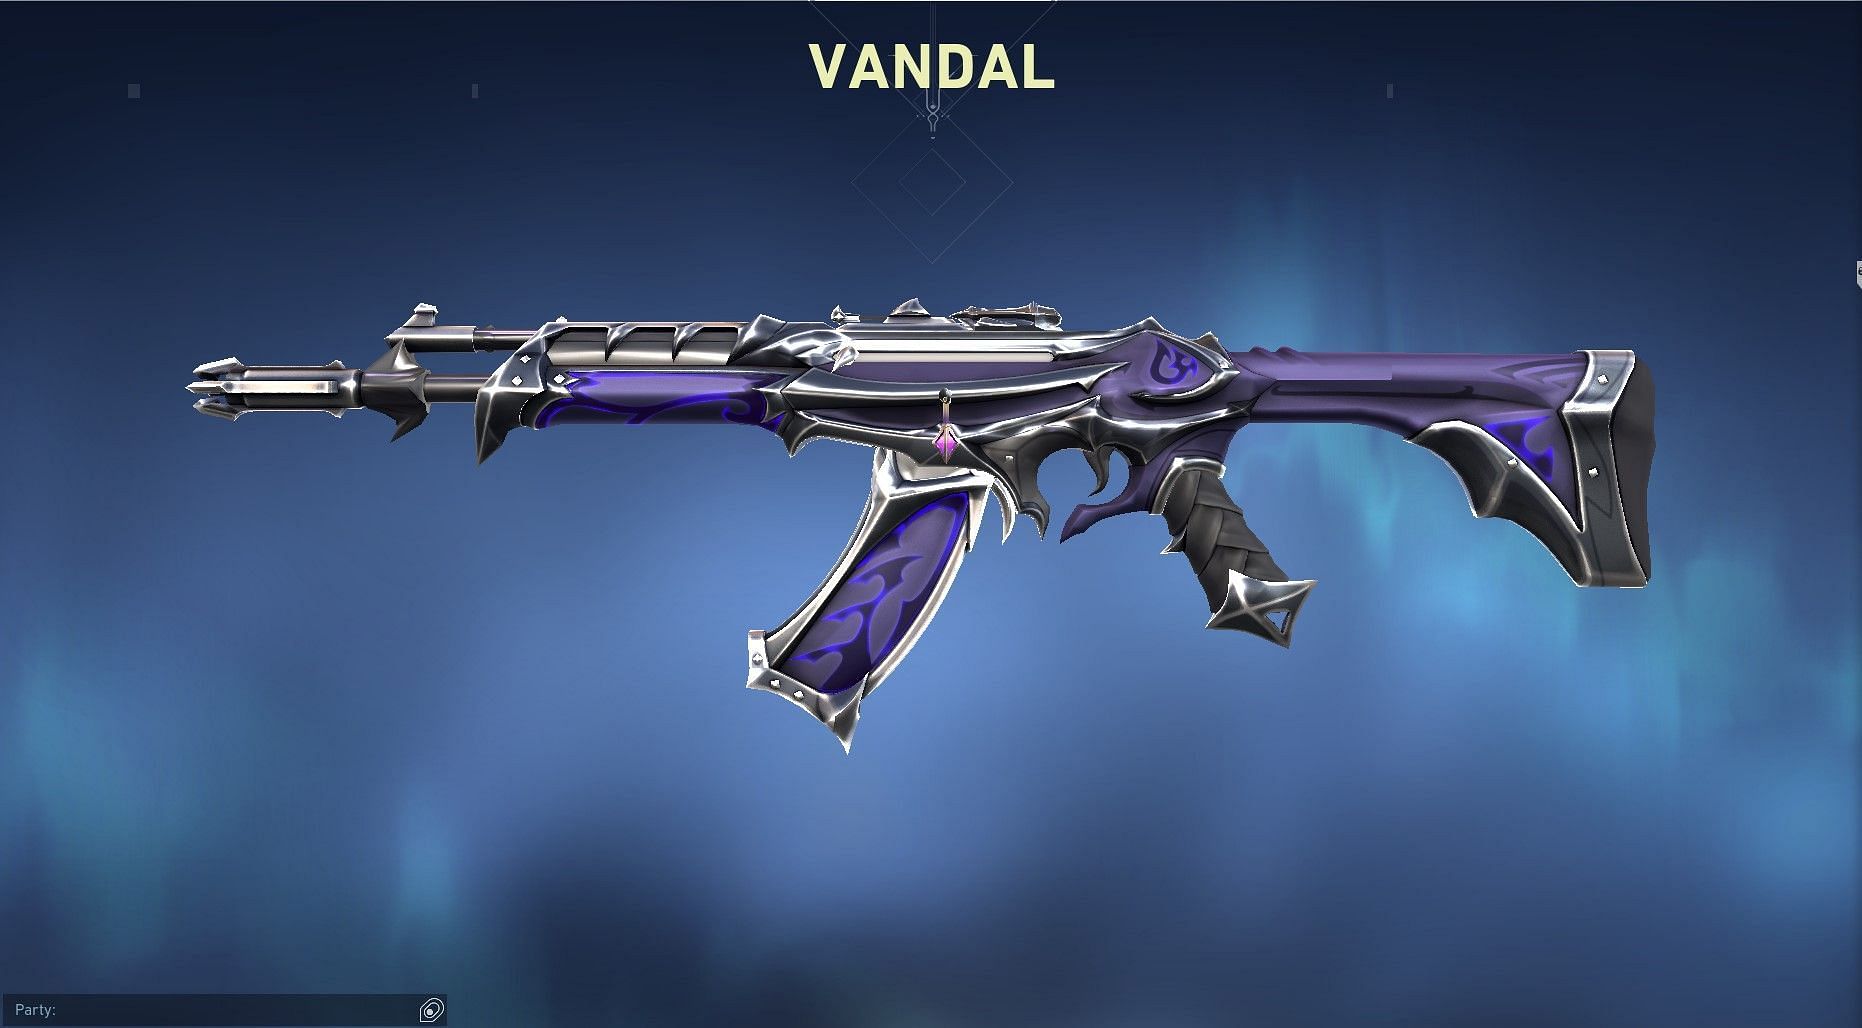 Reaver Vandal can be bought for 1775 VP (Image via Valorant)